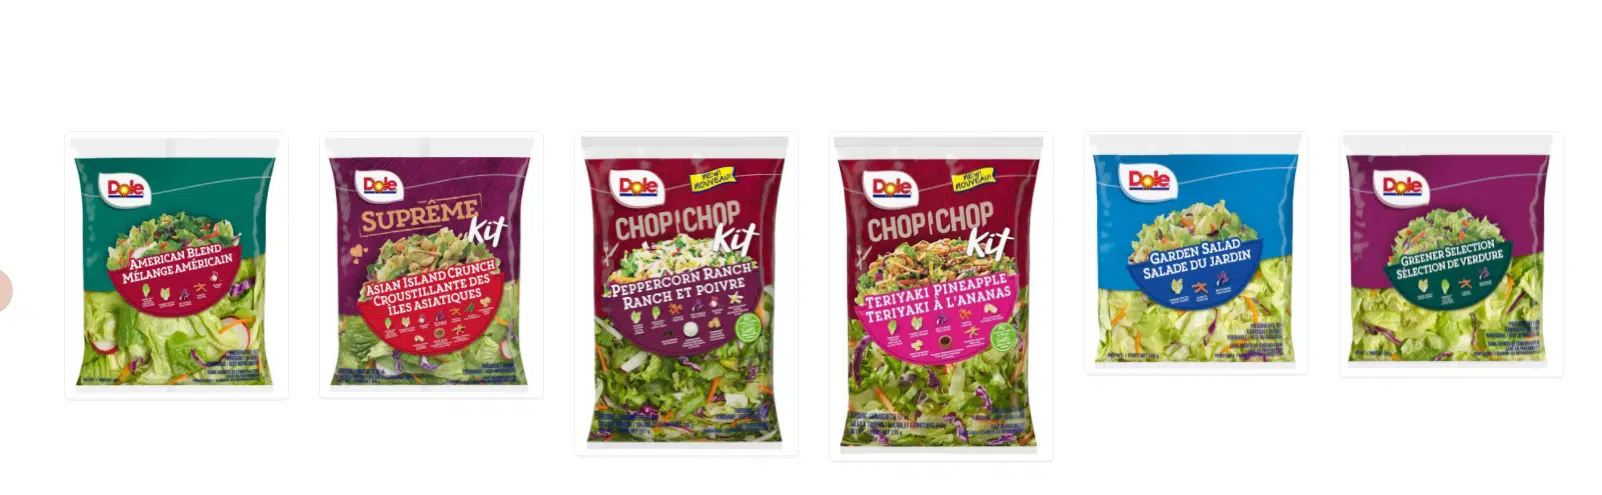 Recall Of Dole And President’s Choice Salads